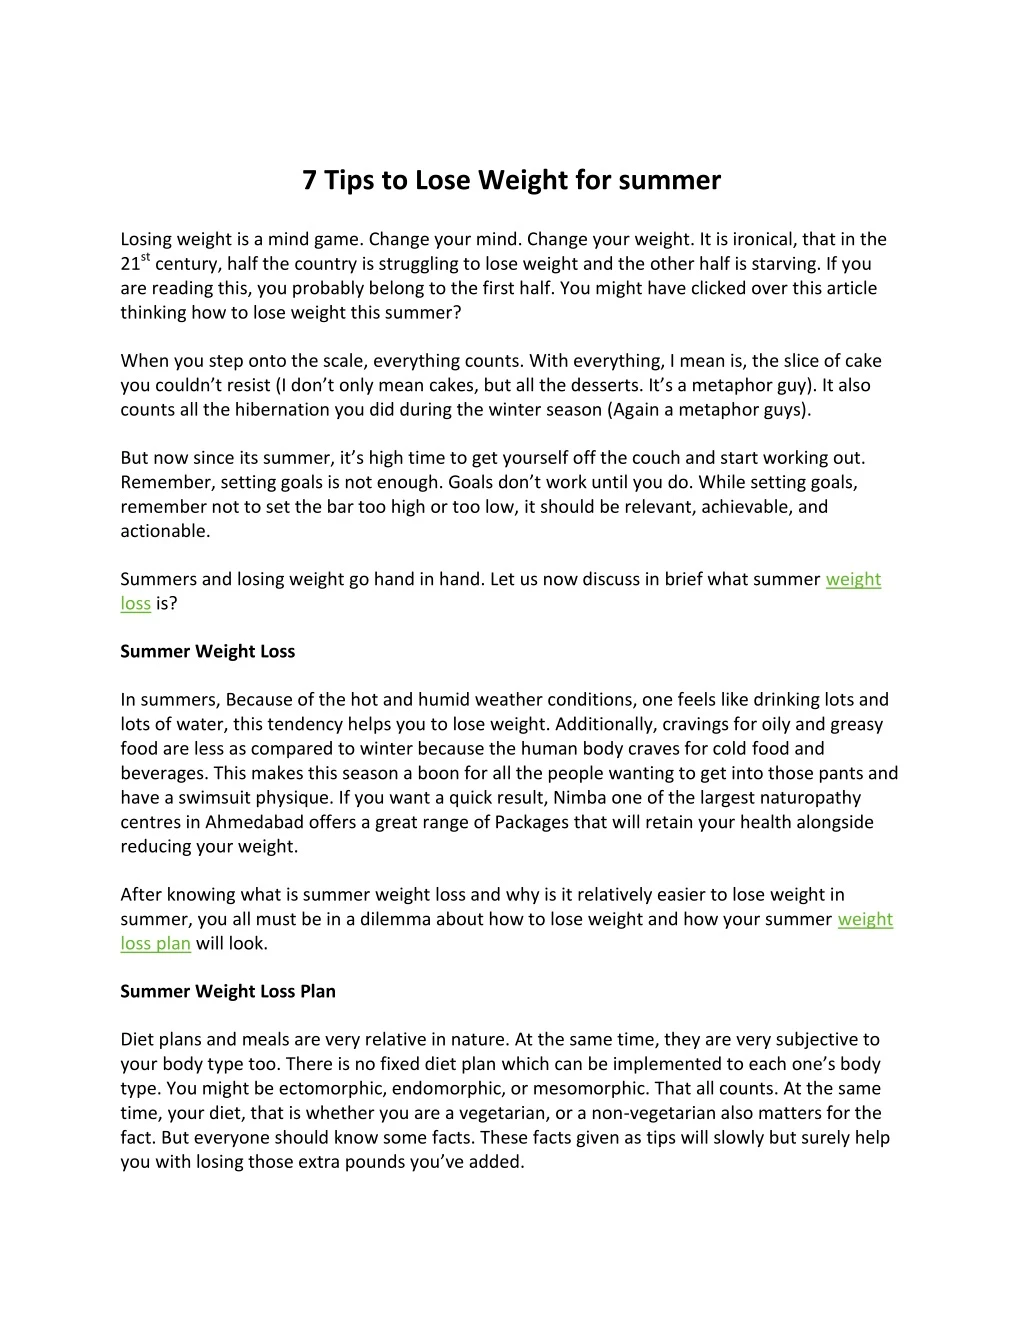 7 tips to lose weight for summer